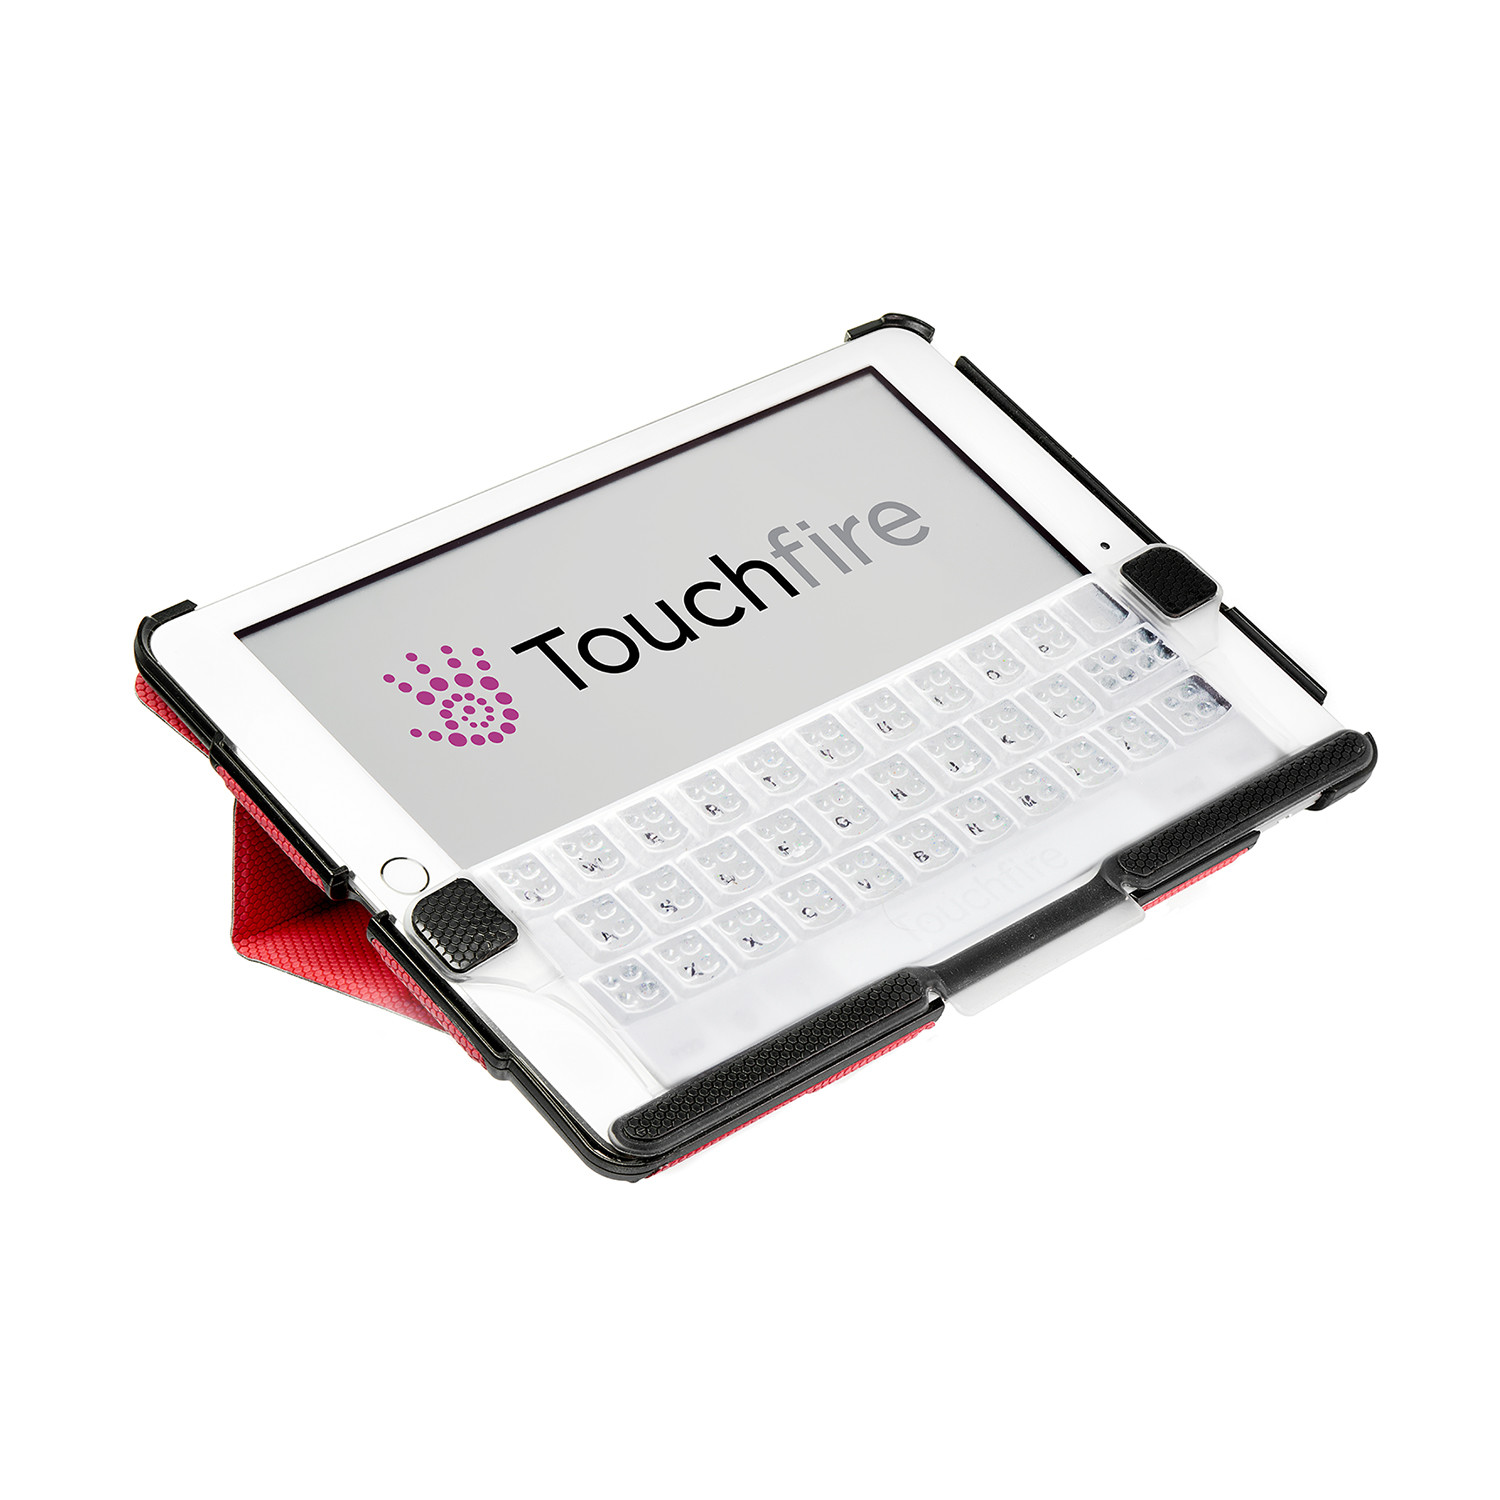 Touchfire Ultimate Ipad Case With Keyboard Sound Booster